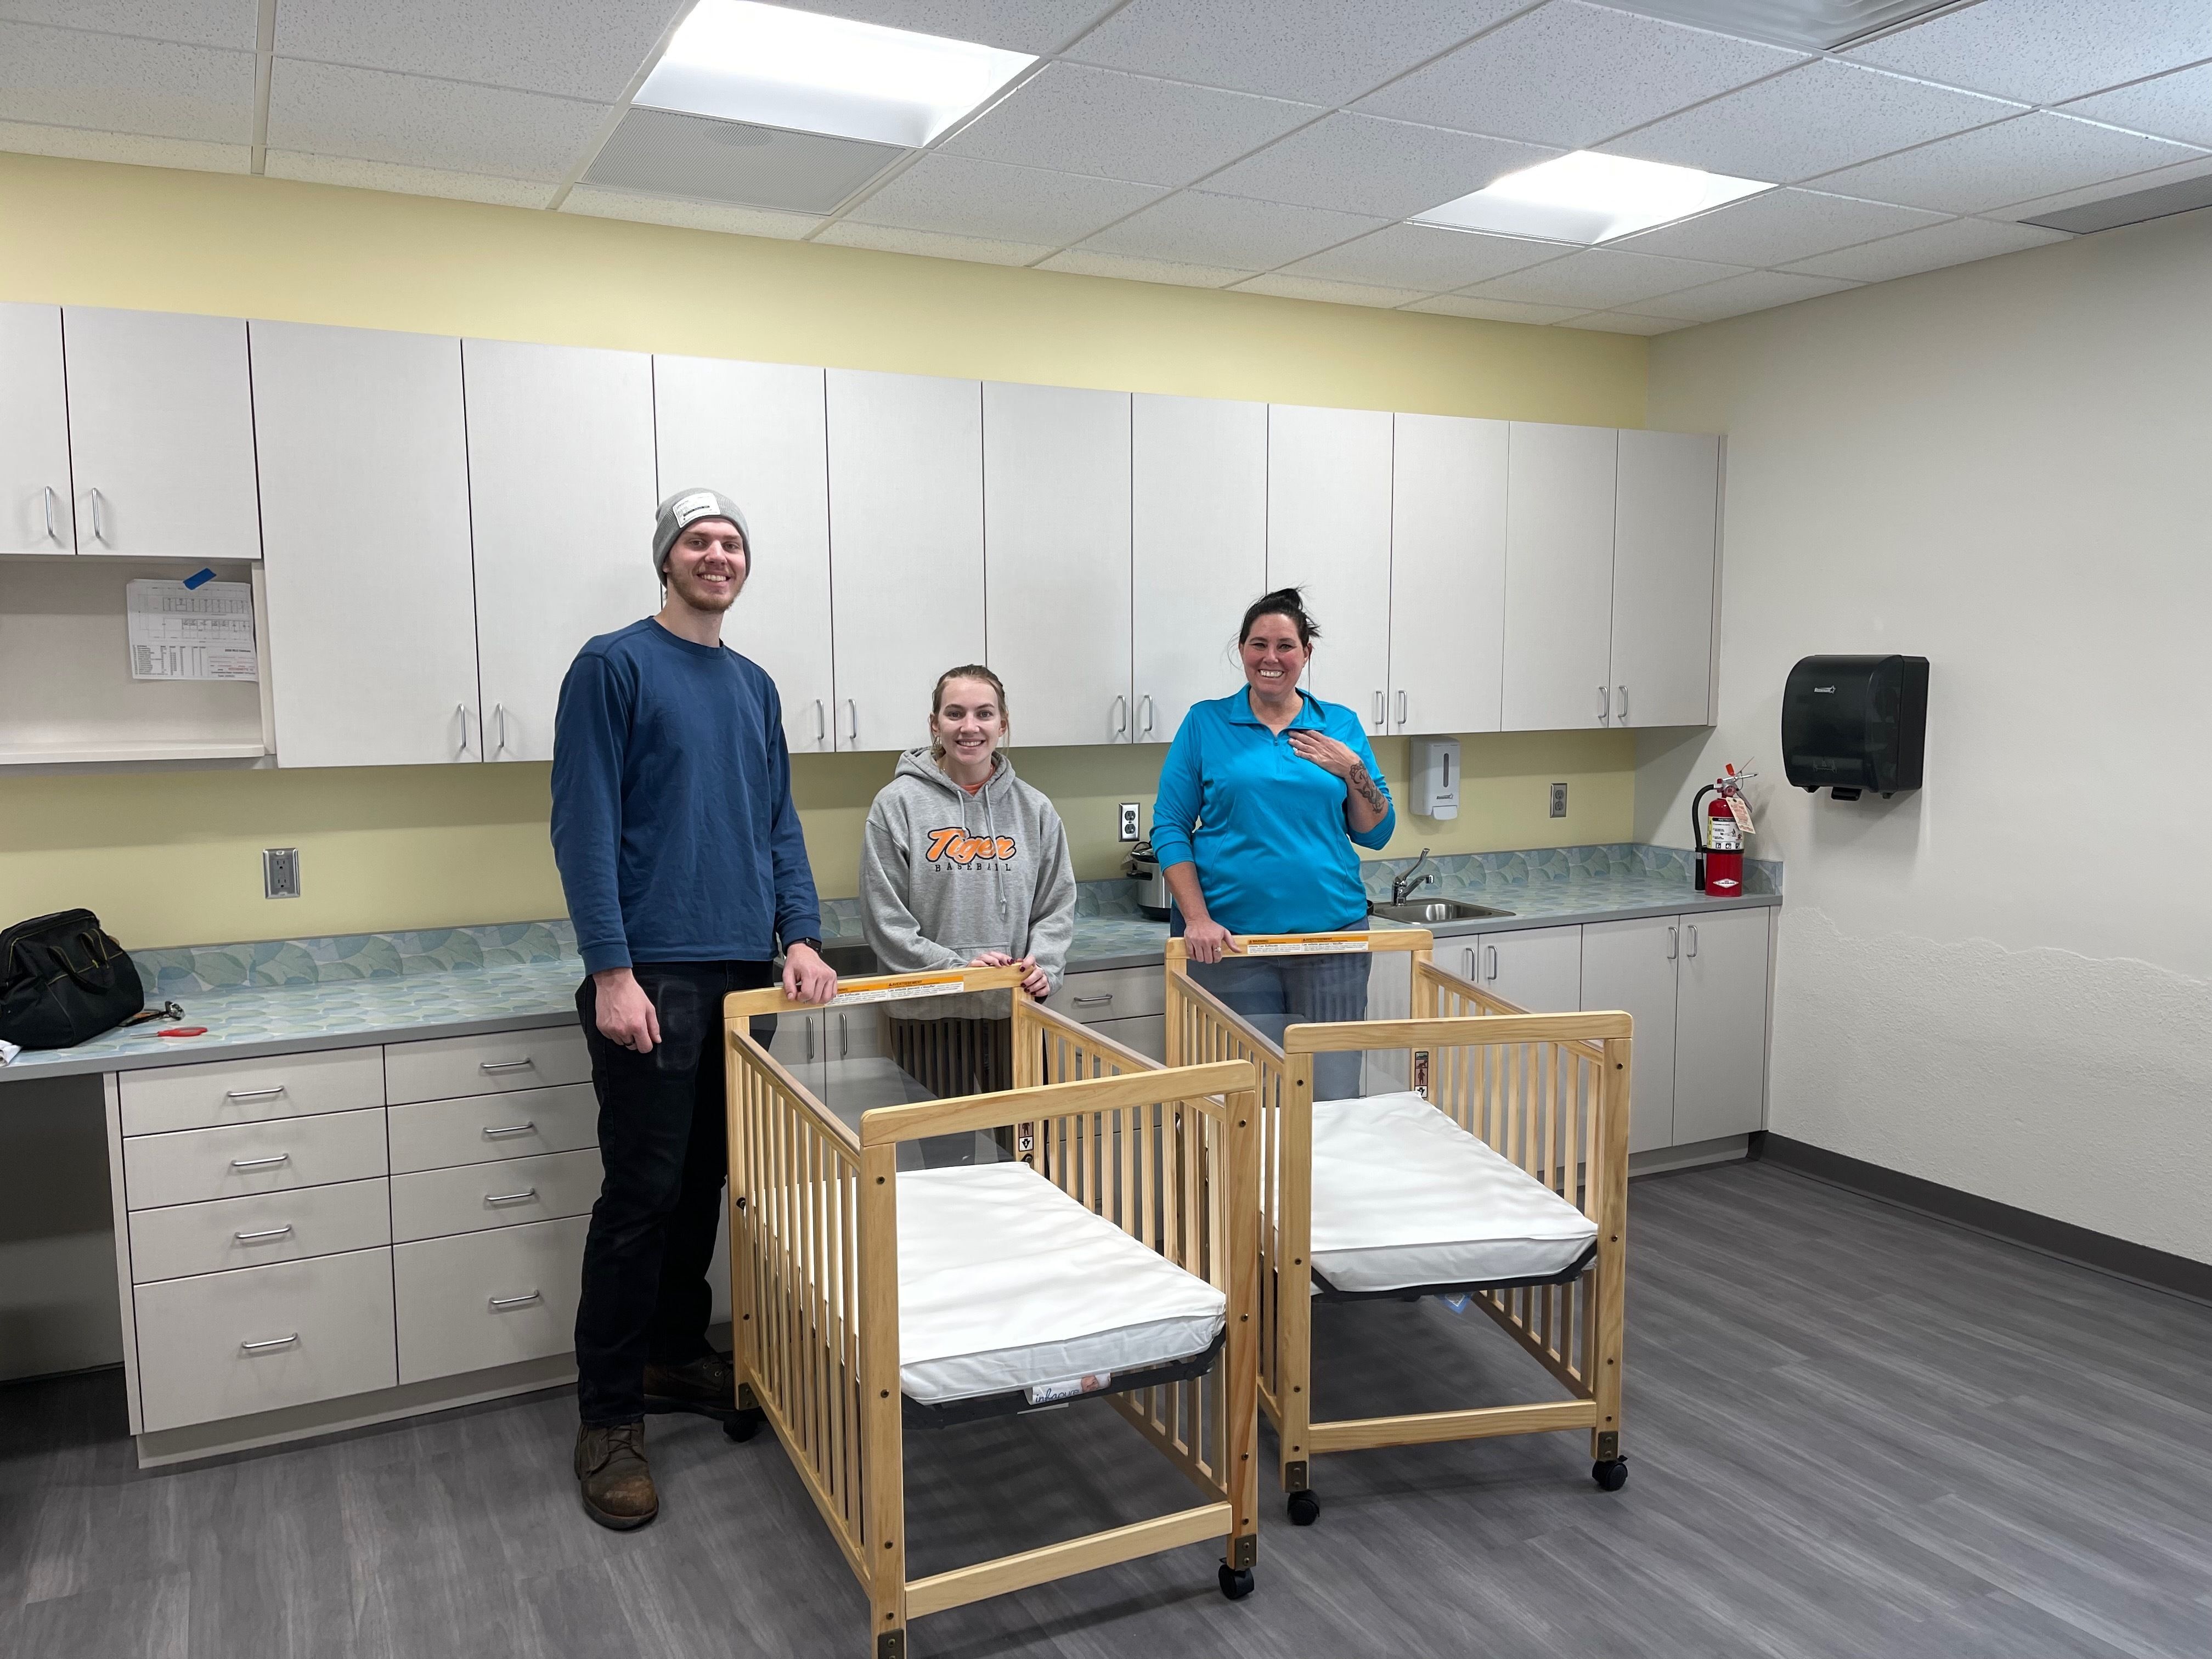 Our new infant room is almost ready! Here's to a Happy 2023!